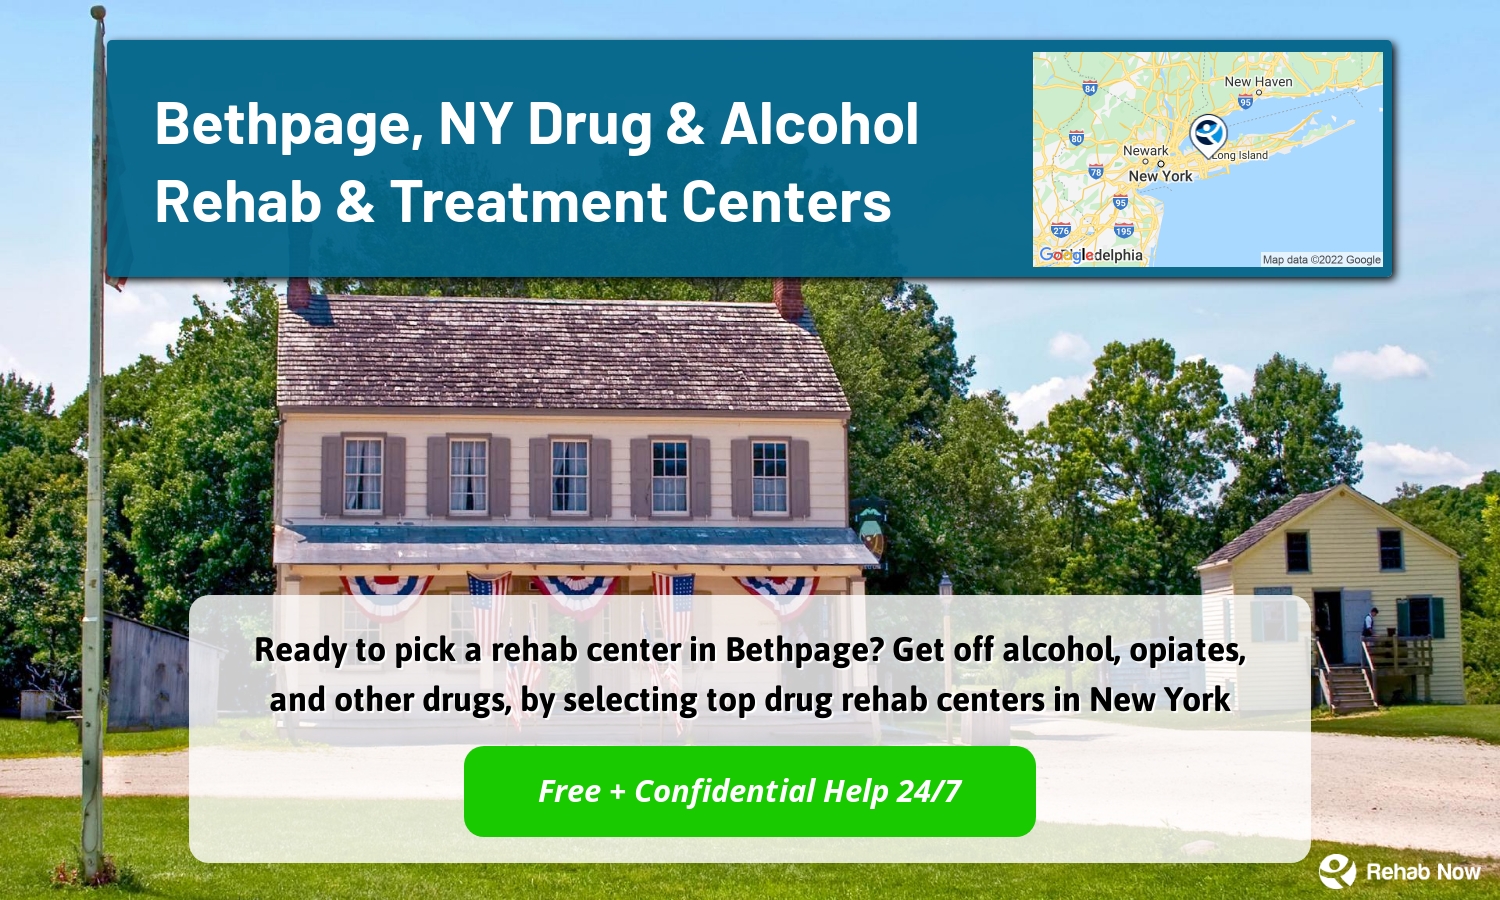 Ready to pick a rehab center in Bethpage? Get off alcohol, opiates, and other drugs, by selecting top drug rehab centers in New York